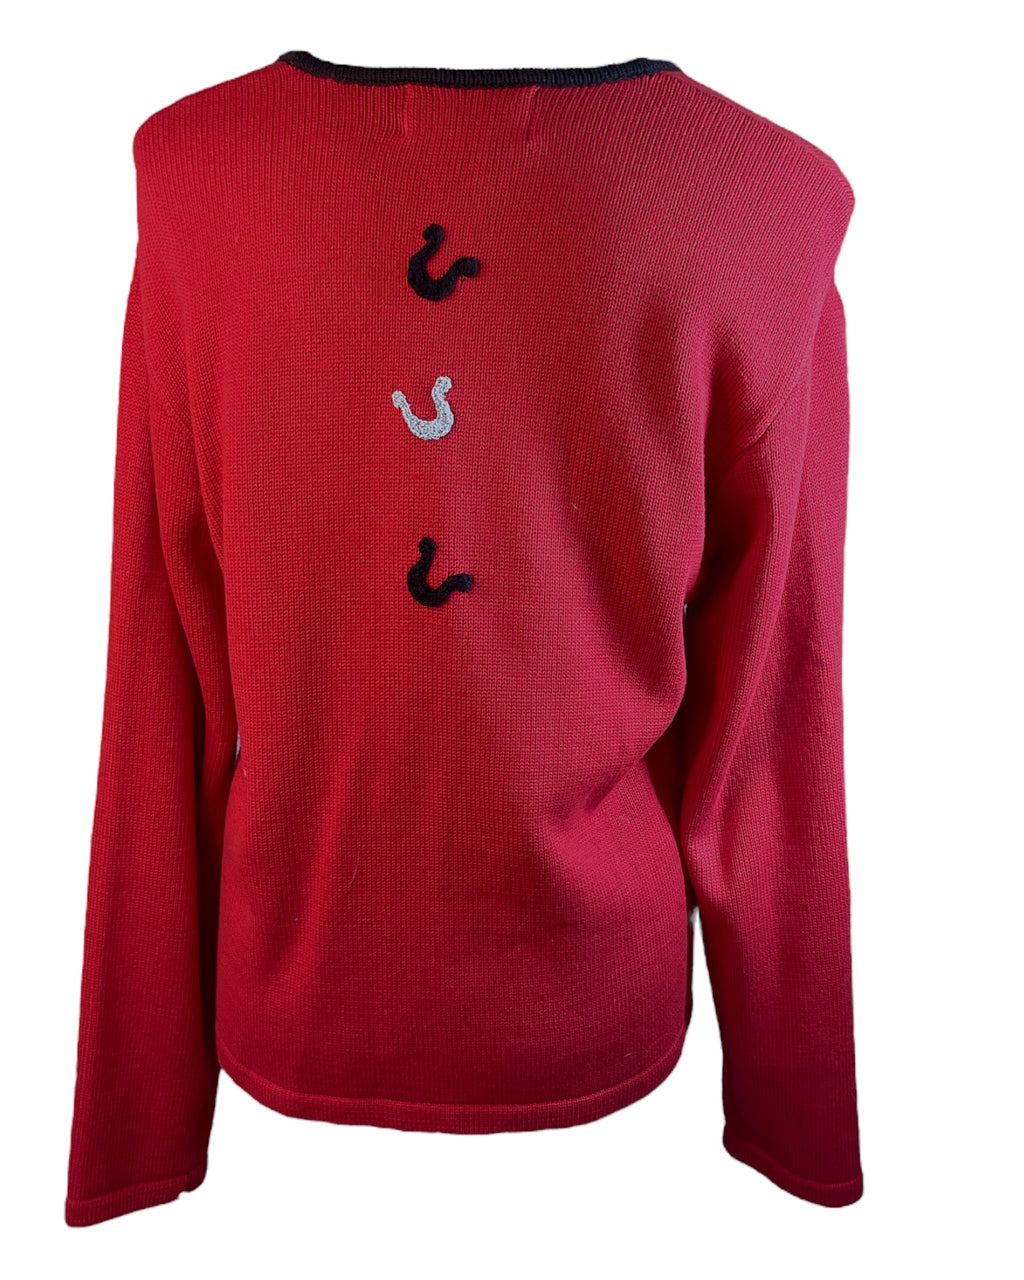 Red Horseshoe Back in the Saddle Sweater, L